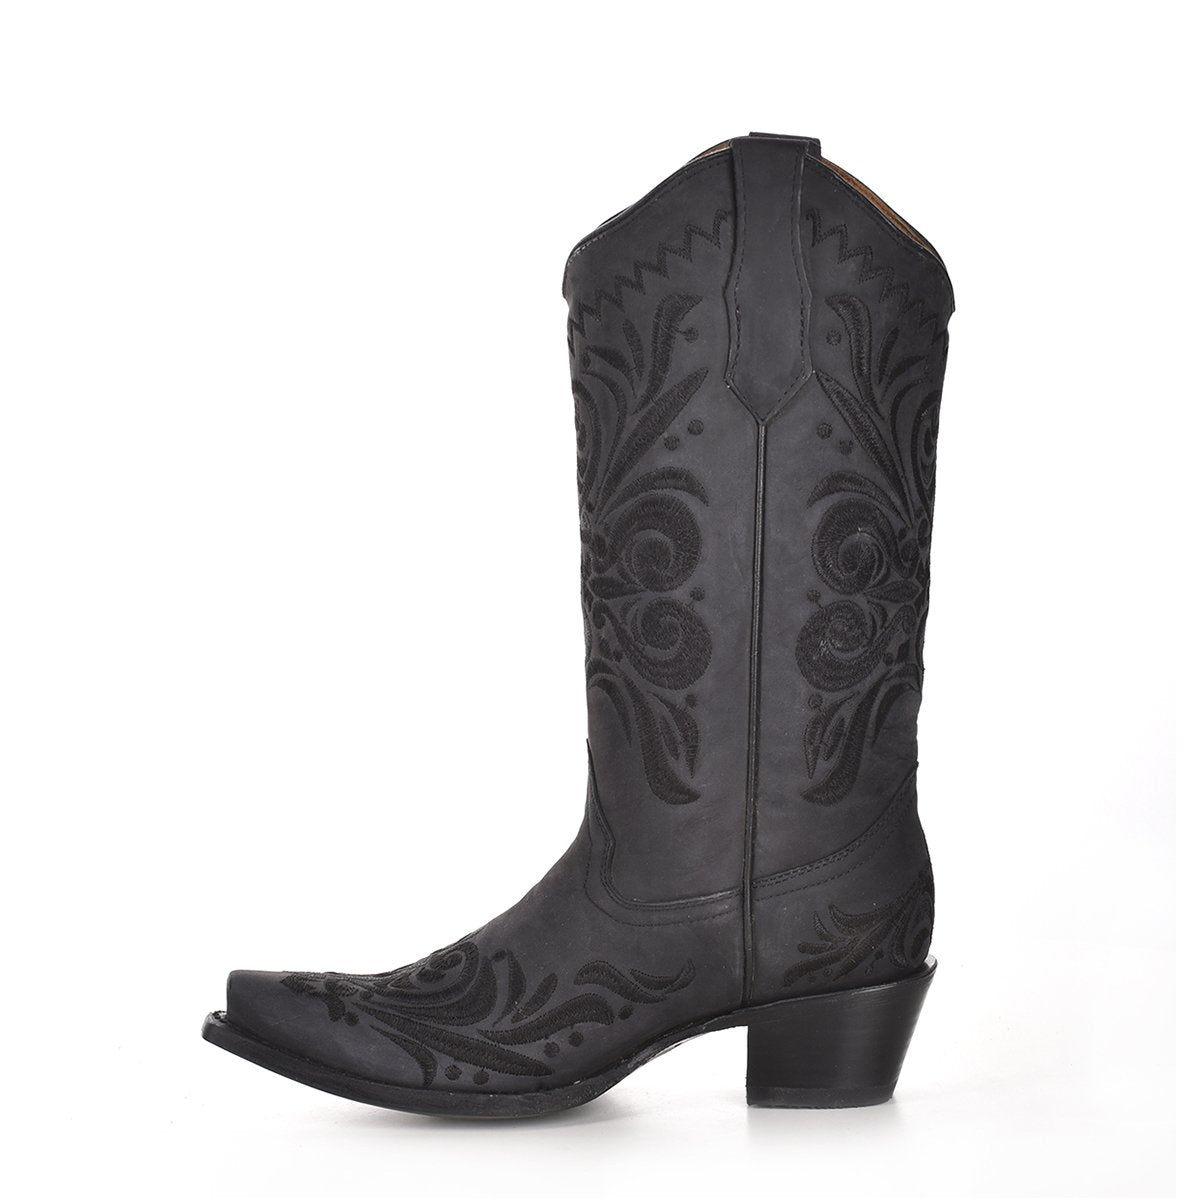 Women's Circle G Black Embroidery Boots